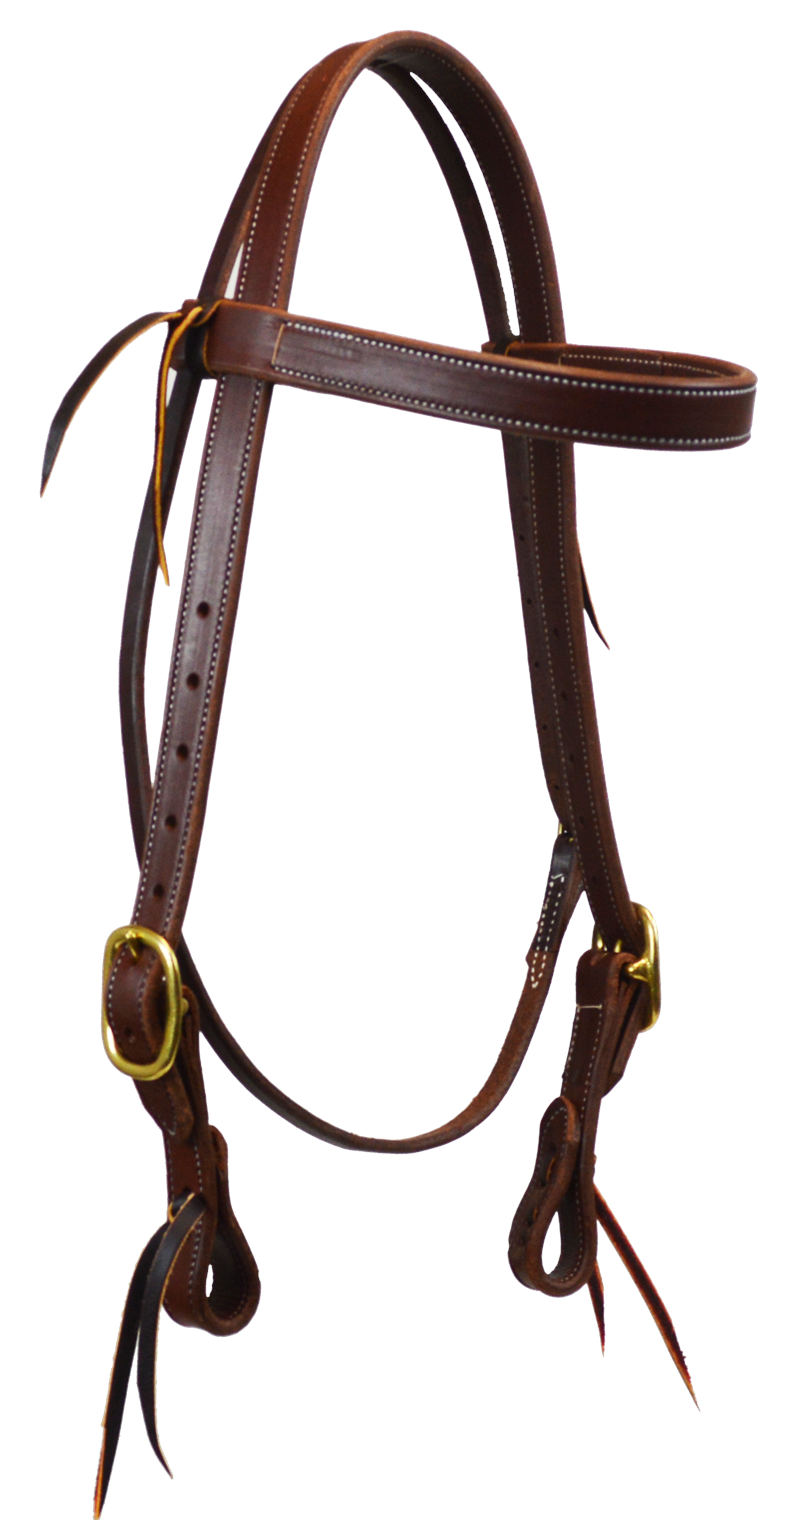 1" DOUBLE & STITCHED BROWBAND HEADSTALL